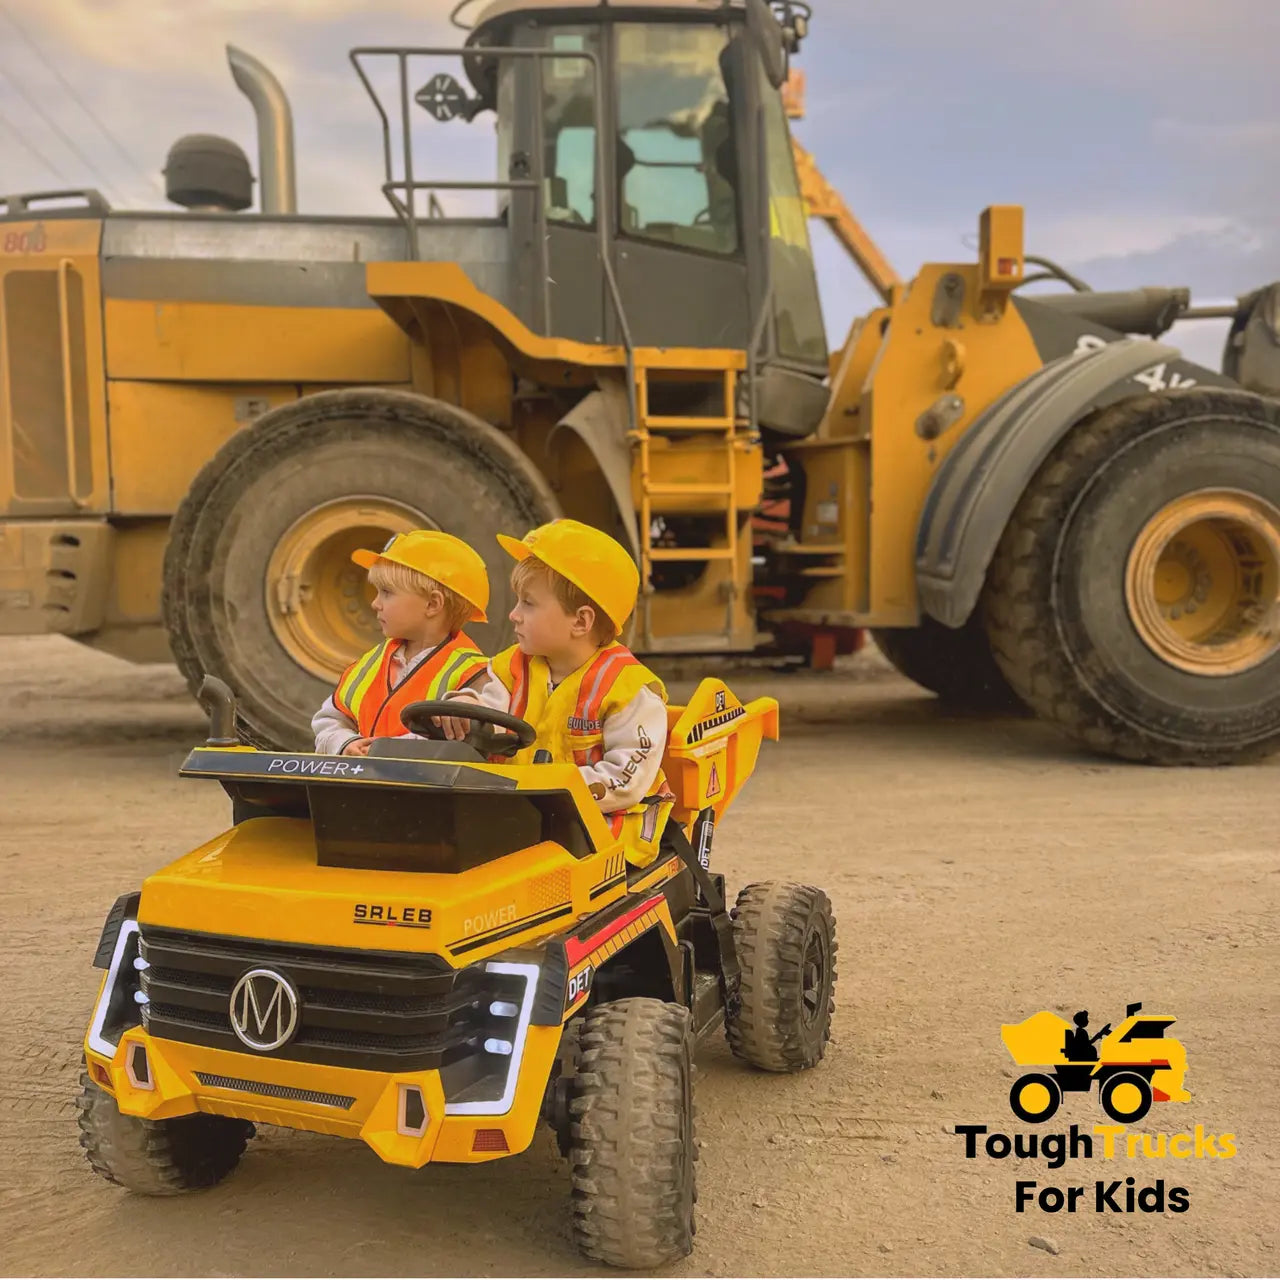 5 Ways Ride-On Construction Trucks Can Spark Creativity in Kids